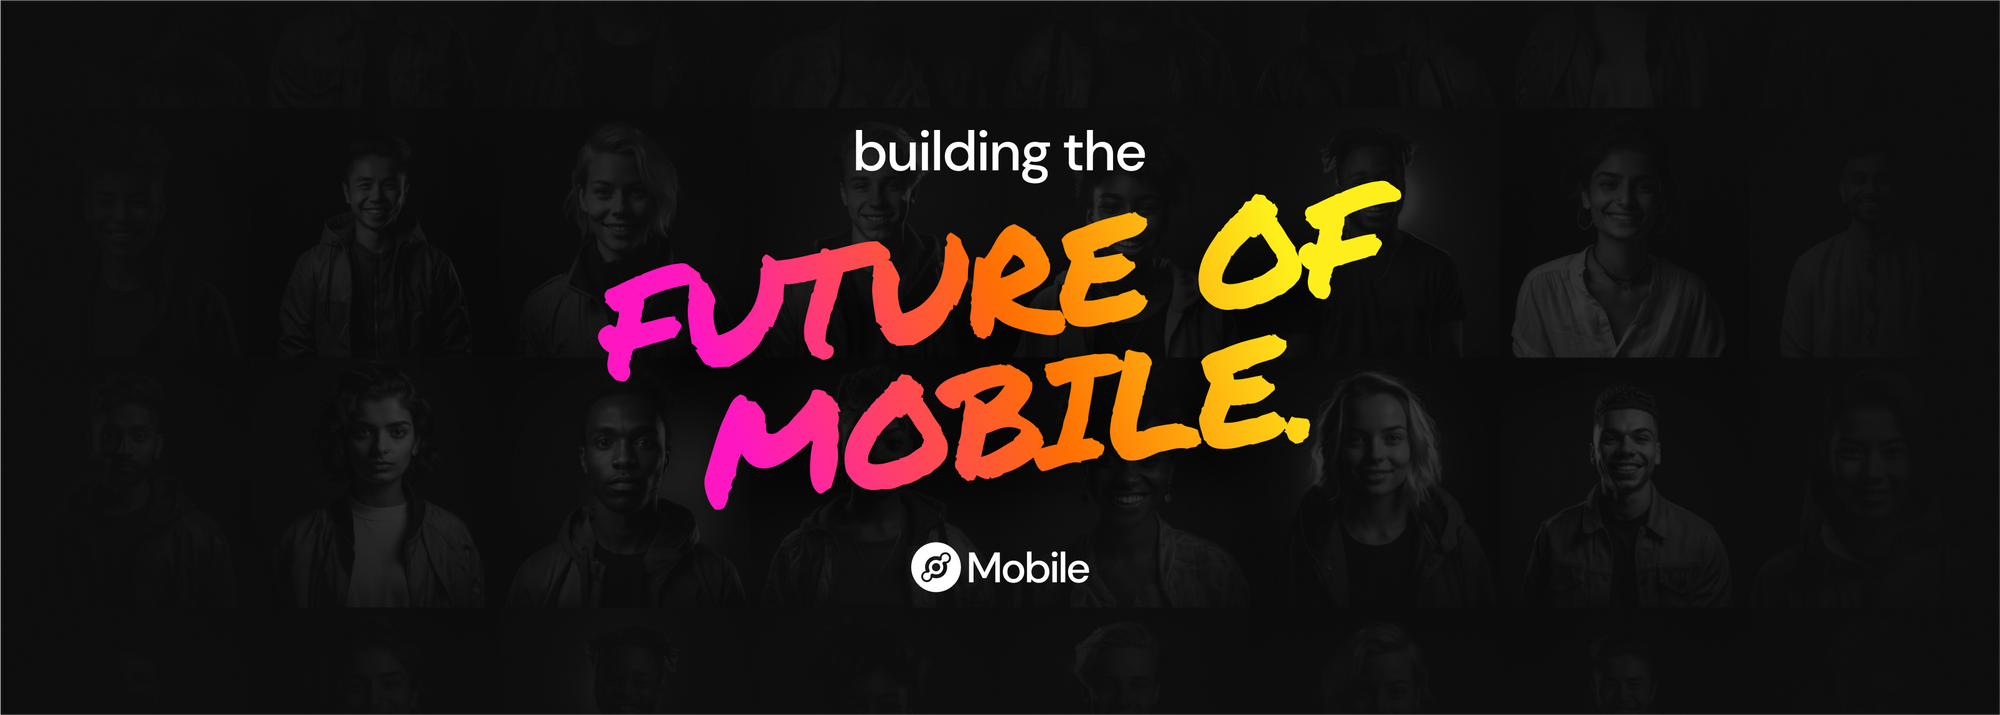 Building the Future of Mobile